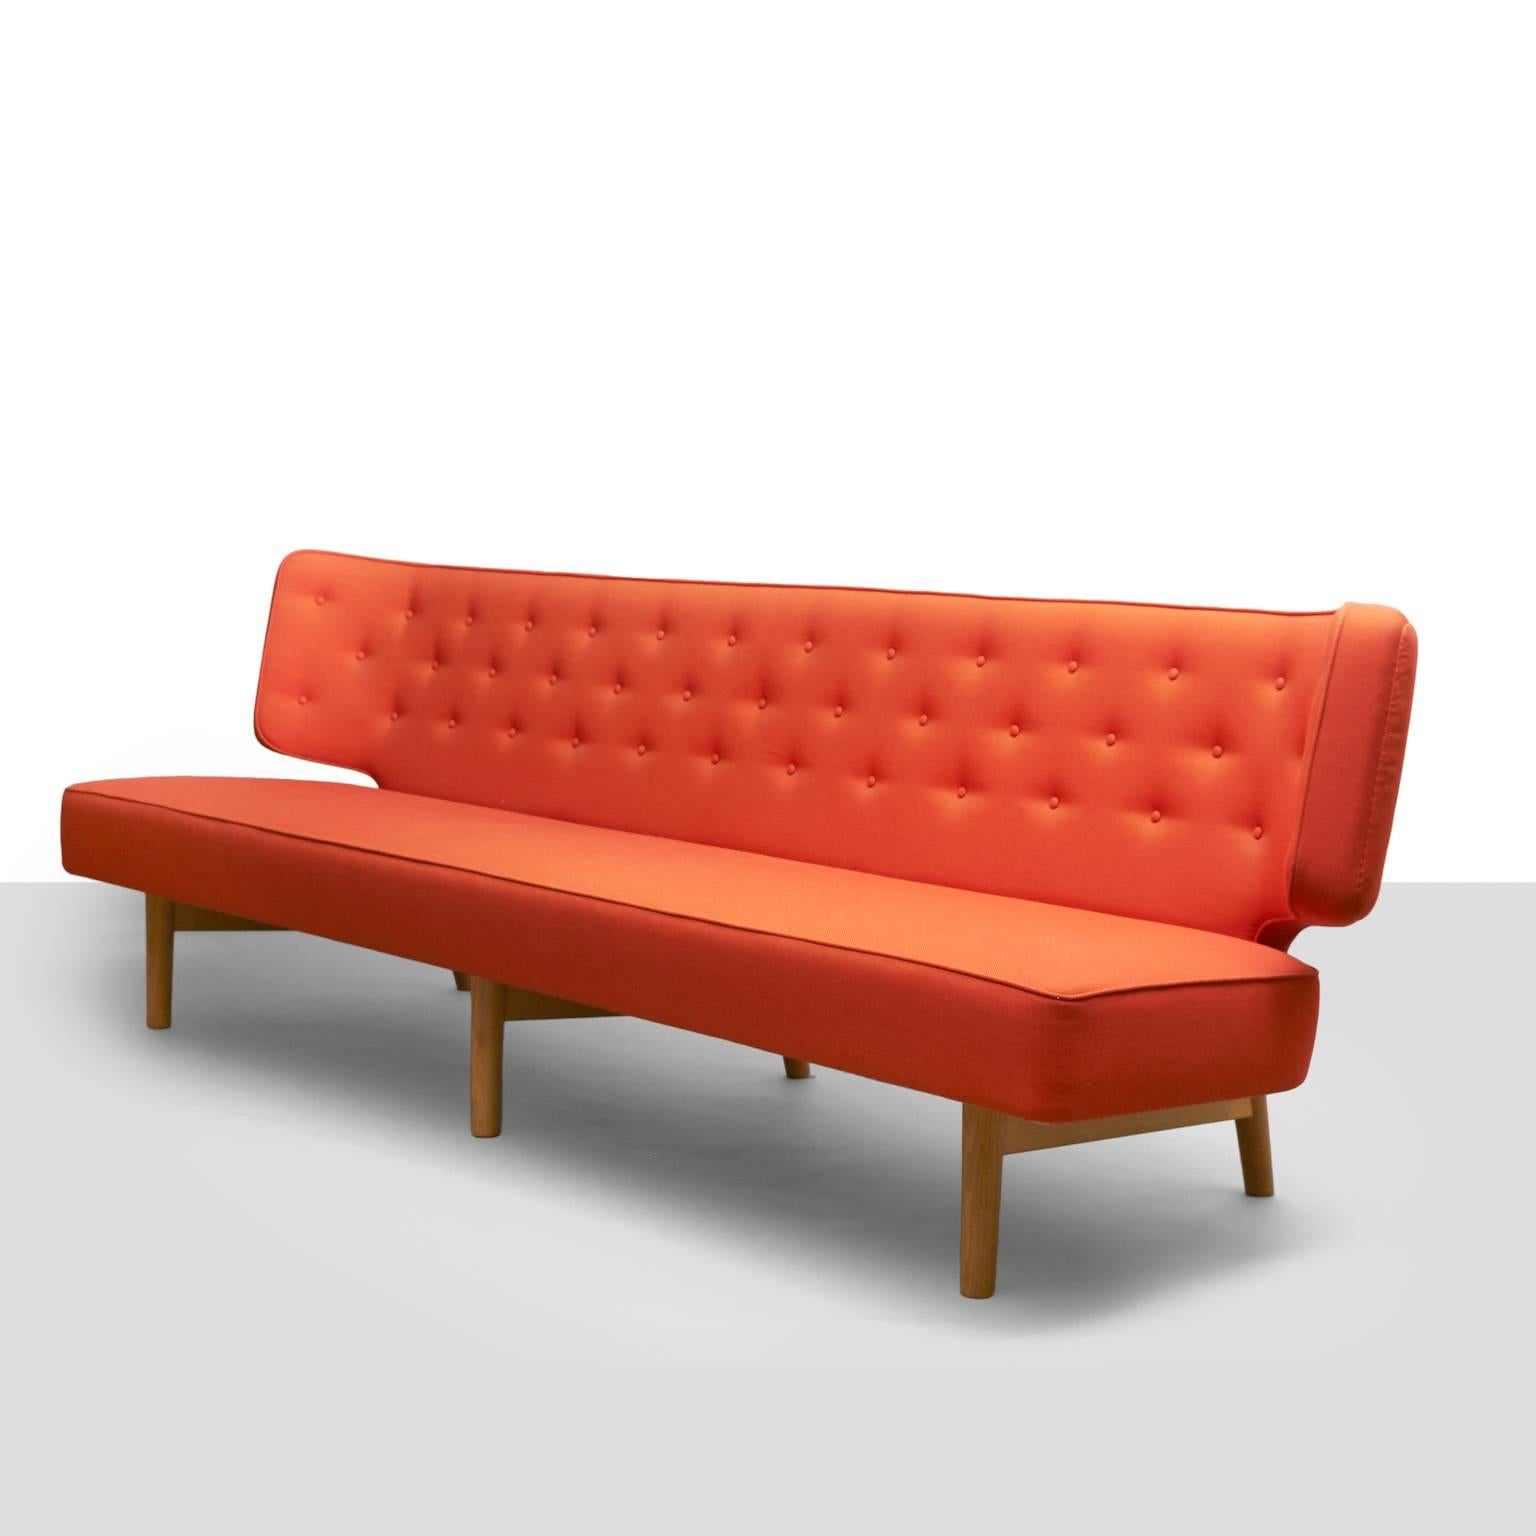 A 3 seat Radiohus Sofa designed by Vilhelm Lauritzen for Brothers Pedersen. A long and sleek, tufted, wing back sofa with beech feet and deep orange upholstery. Designed in 1936 for the Royal Danish Academy of Music, this particular sofa was